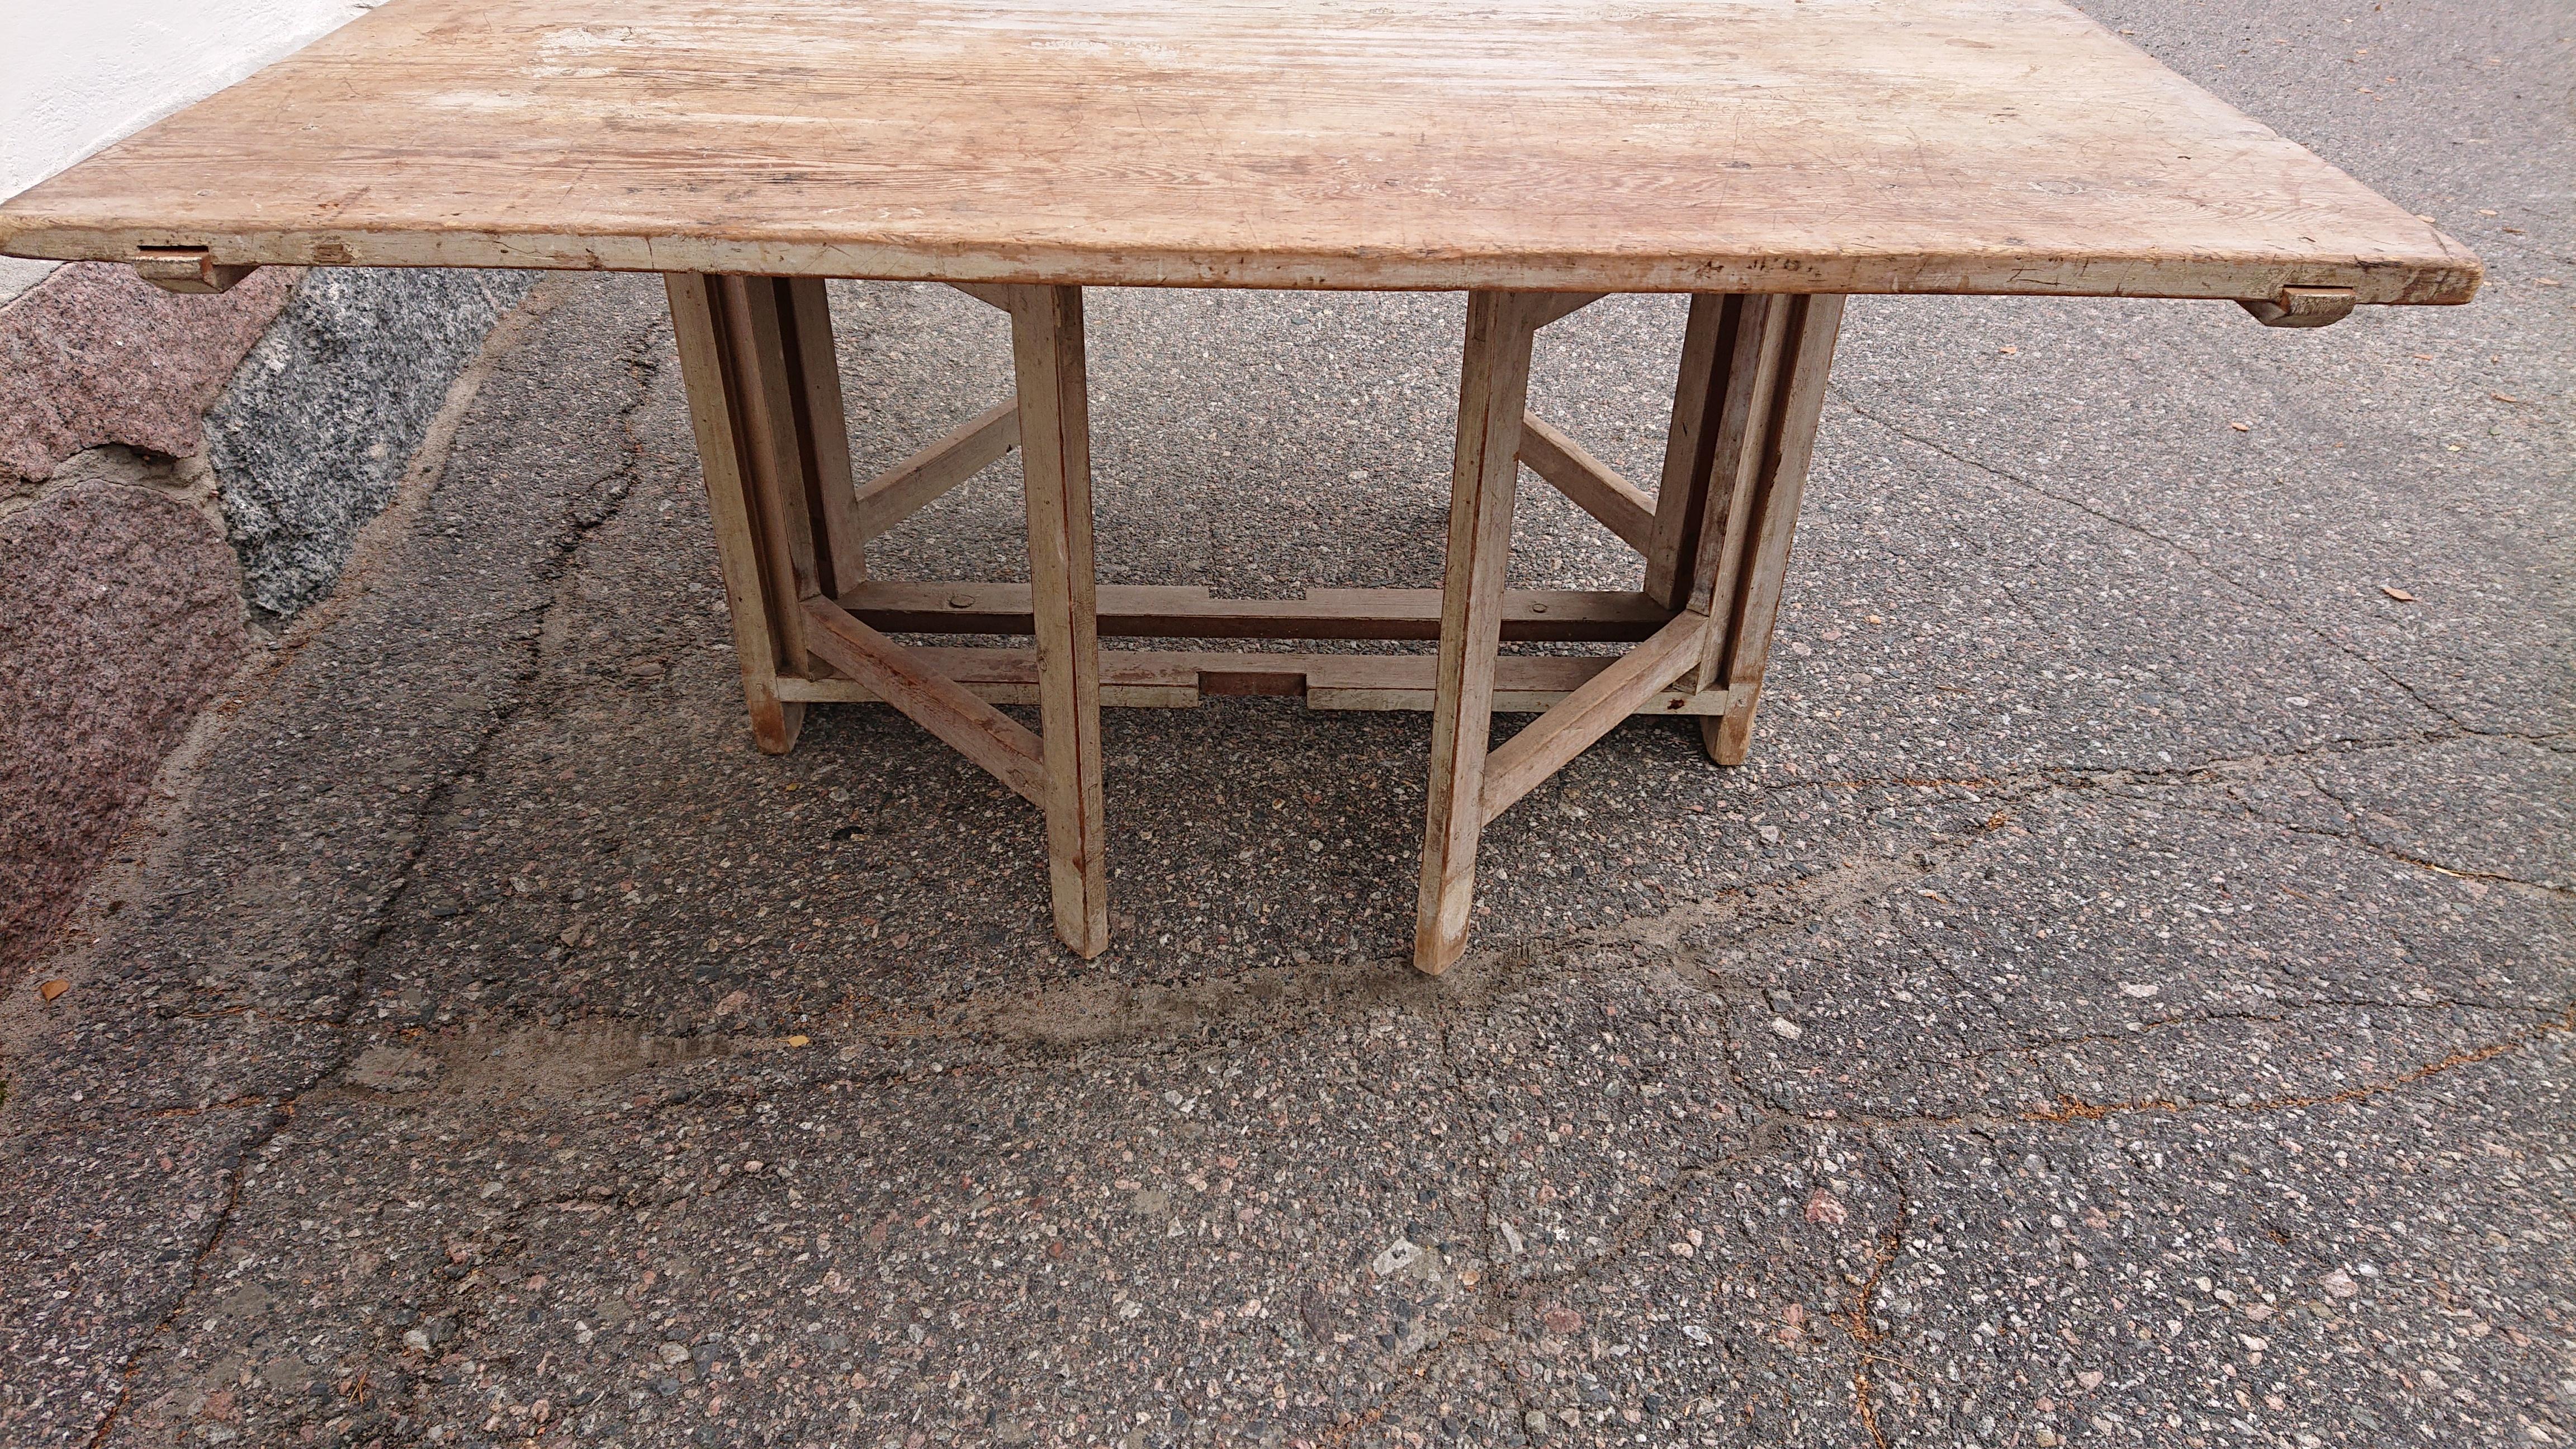 Hand-Crafted 19th Century Swedish Drop Leaf Table with Originalpaint